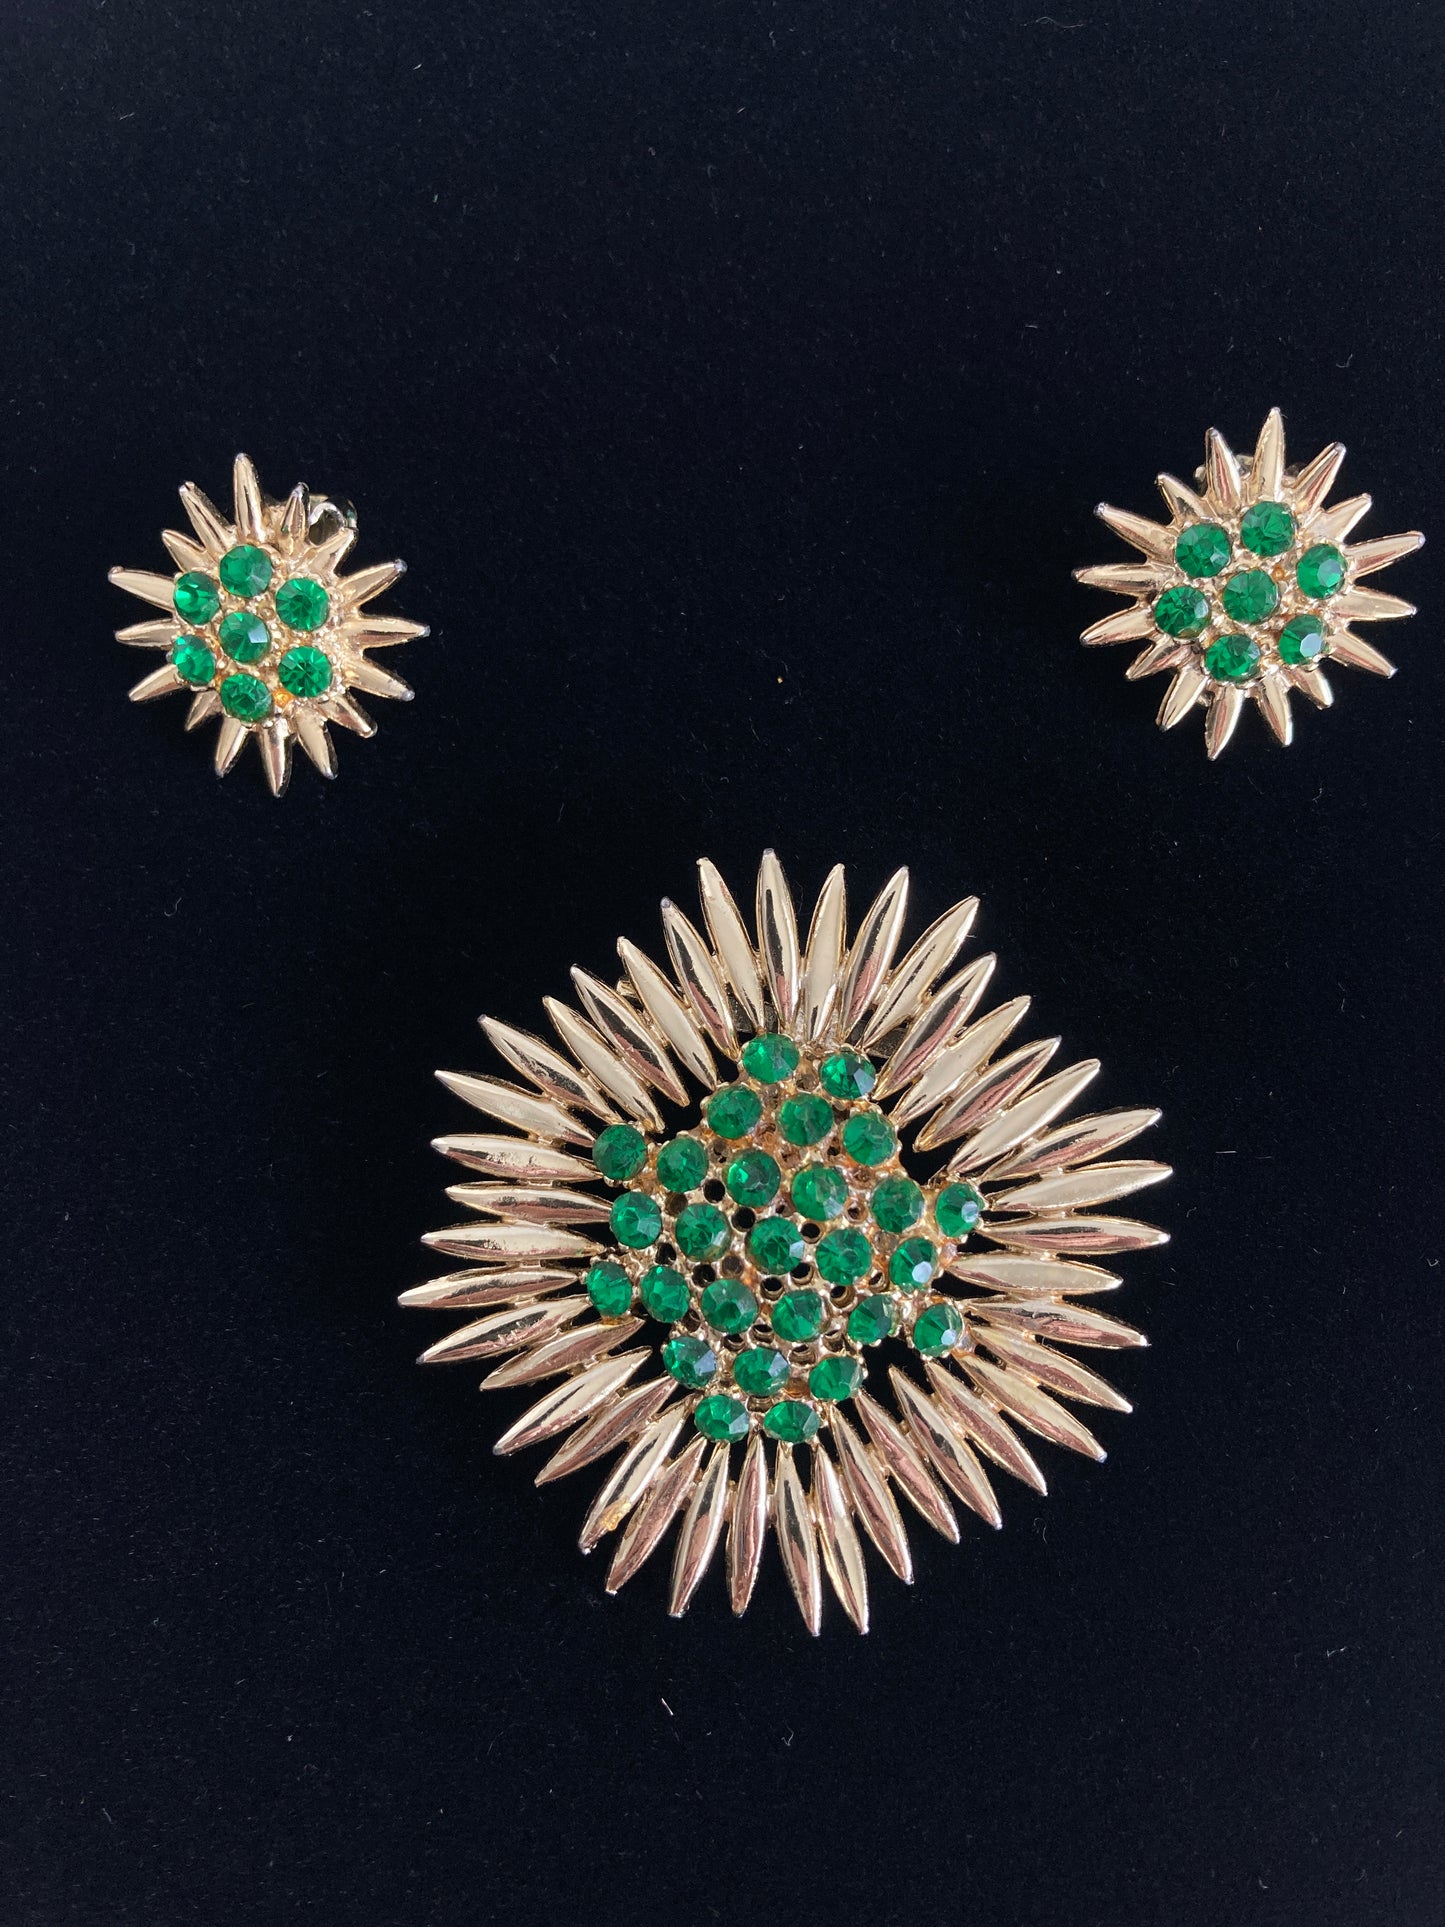 Starburst Brooch and Earrings Set in Green and Gold